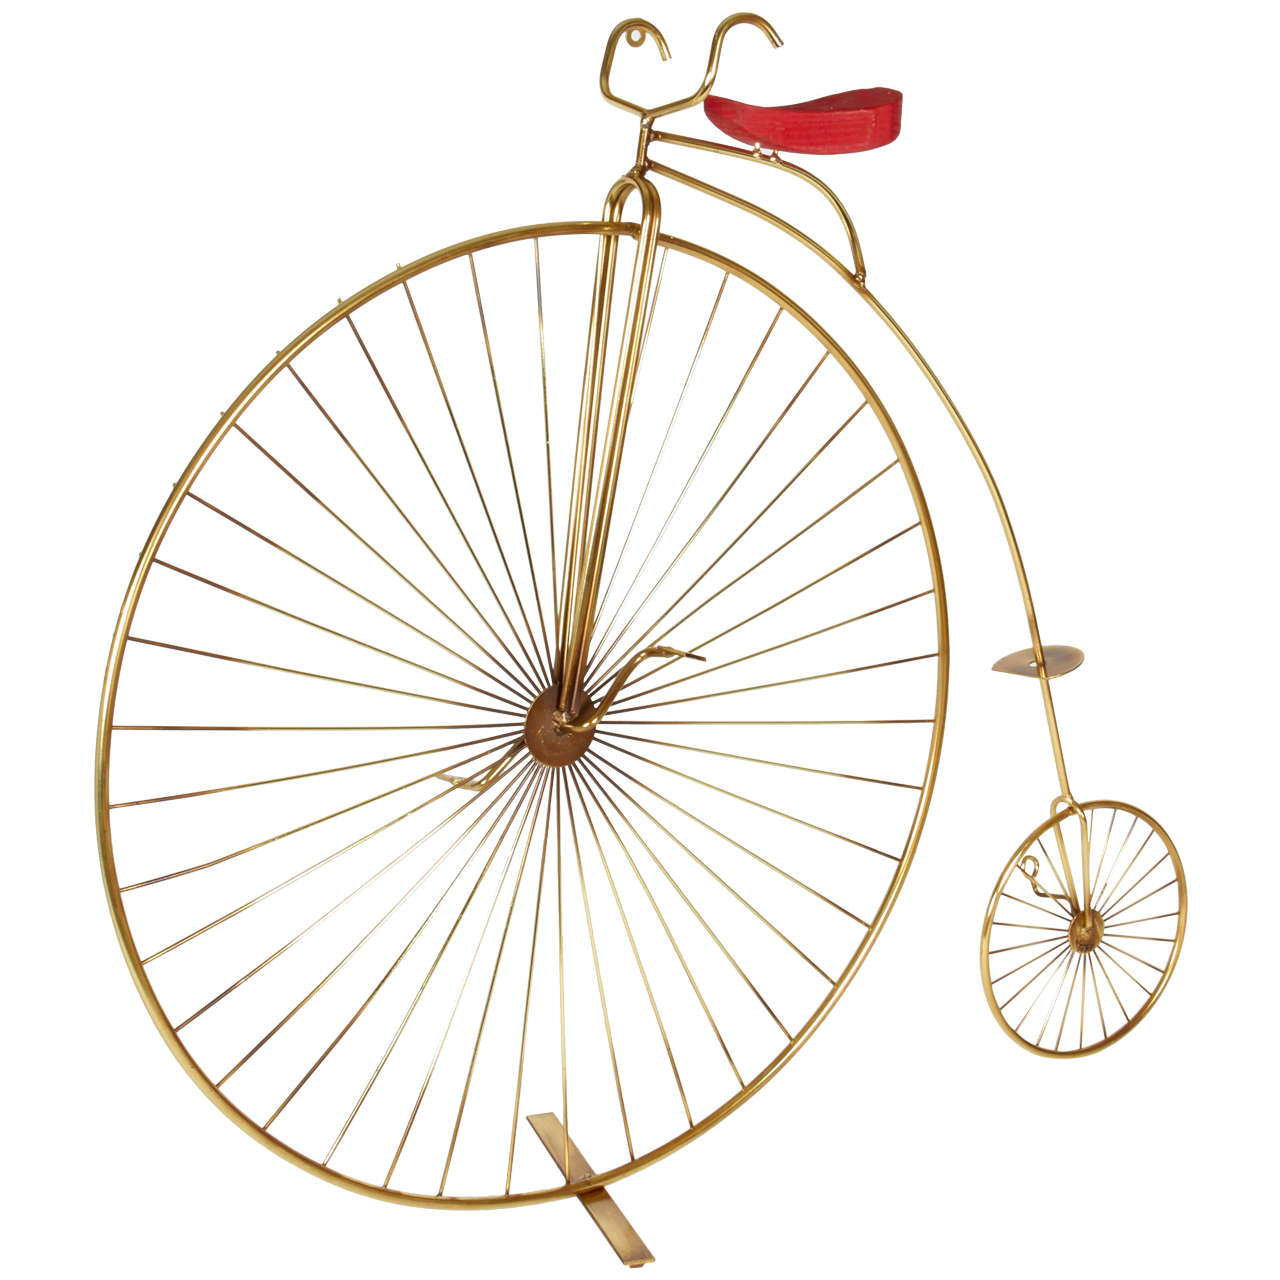 Curtis Jere Bicycle Tabletop or Wall Sculpture